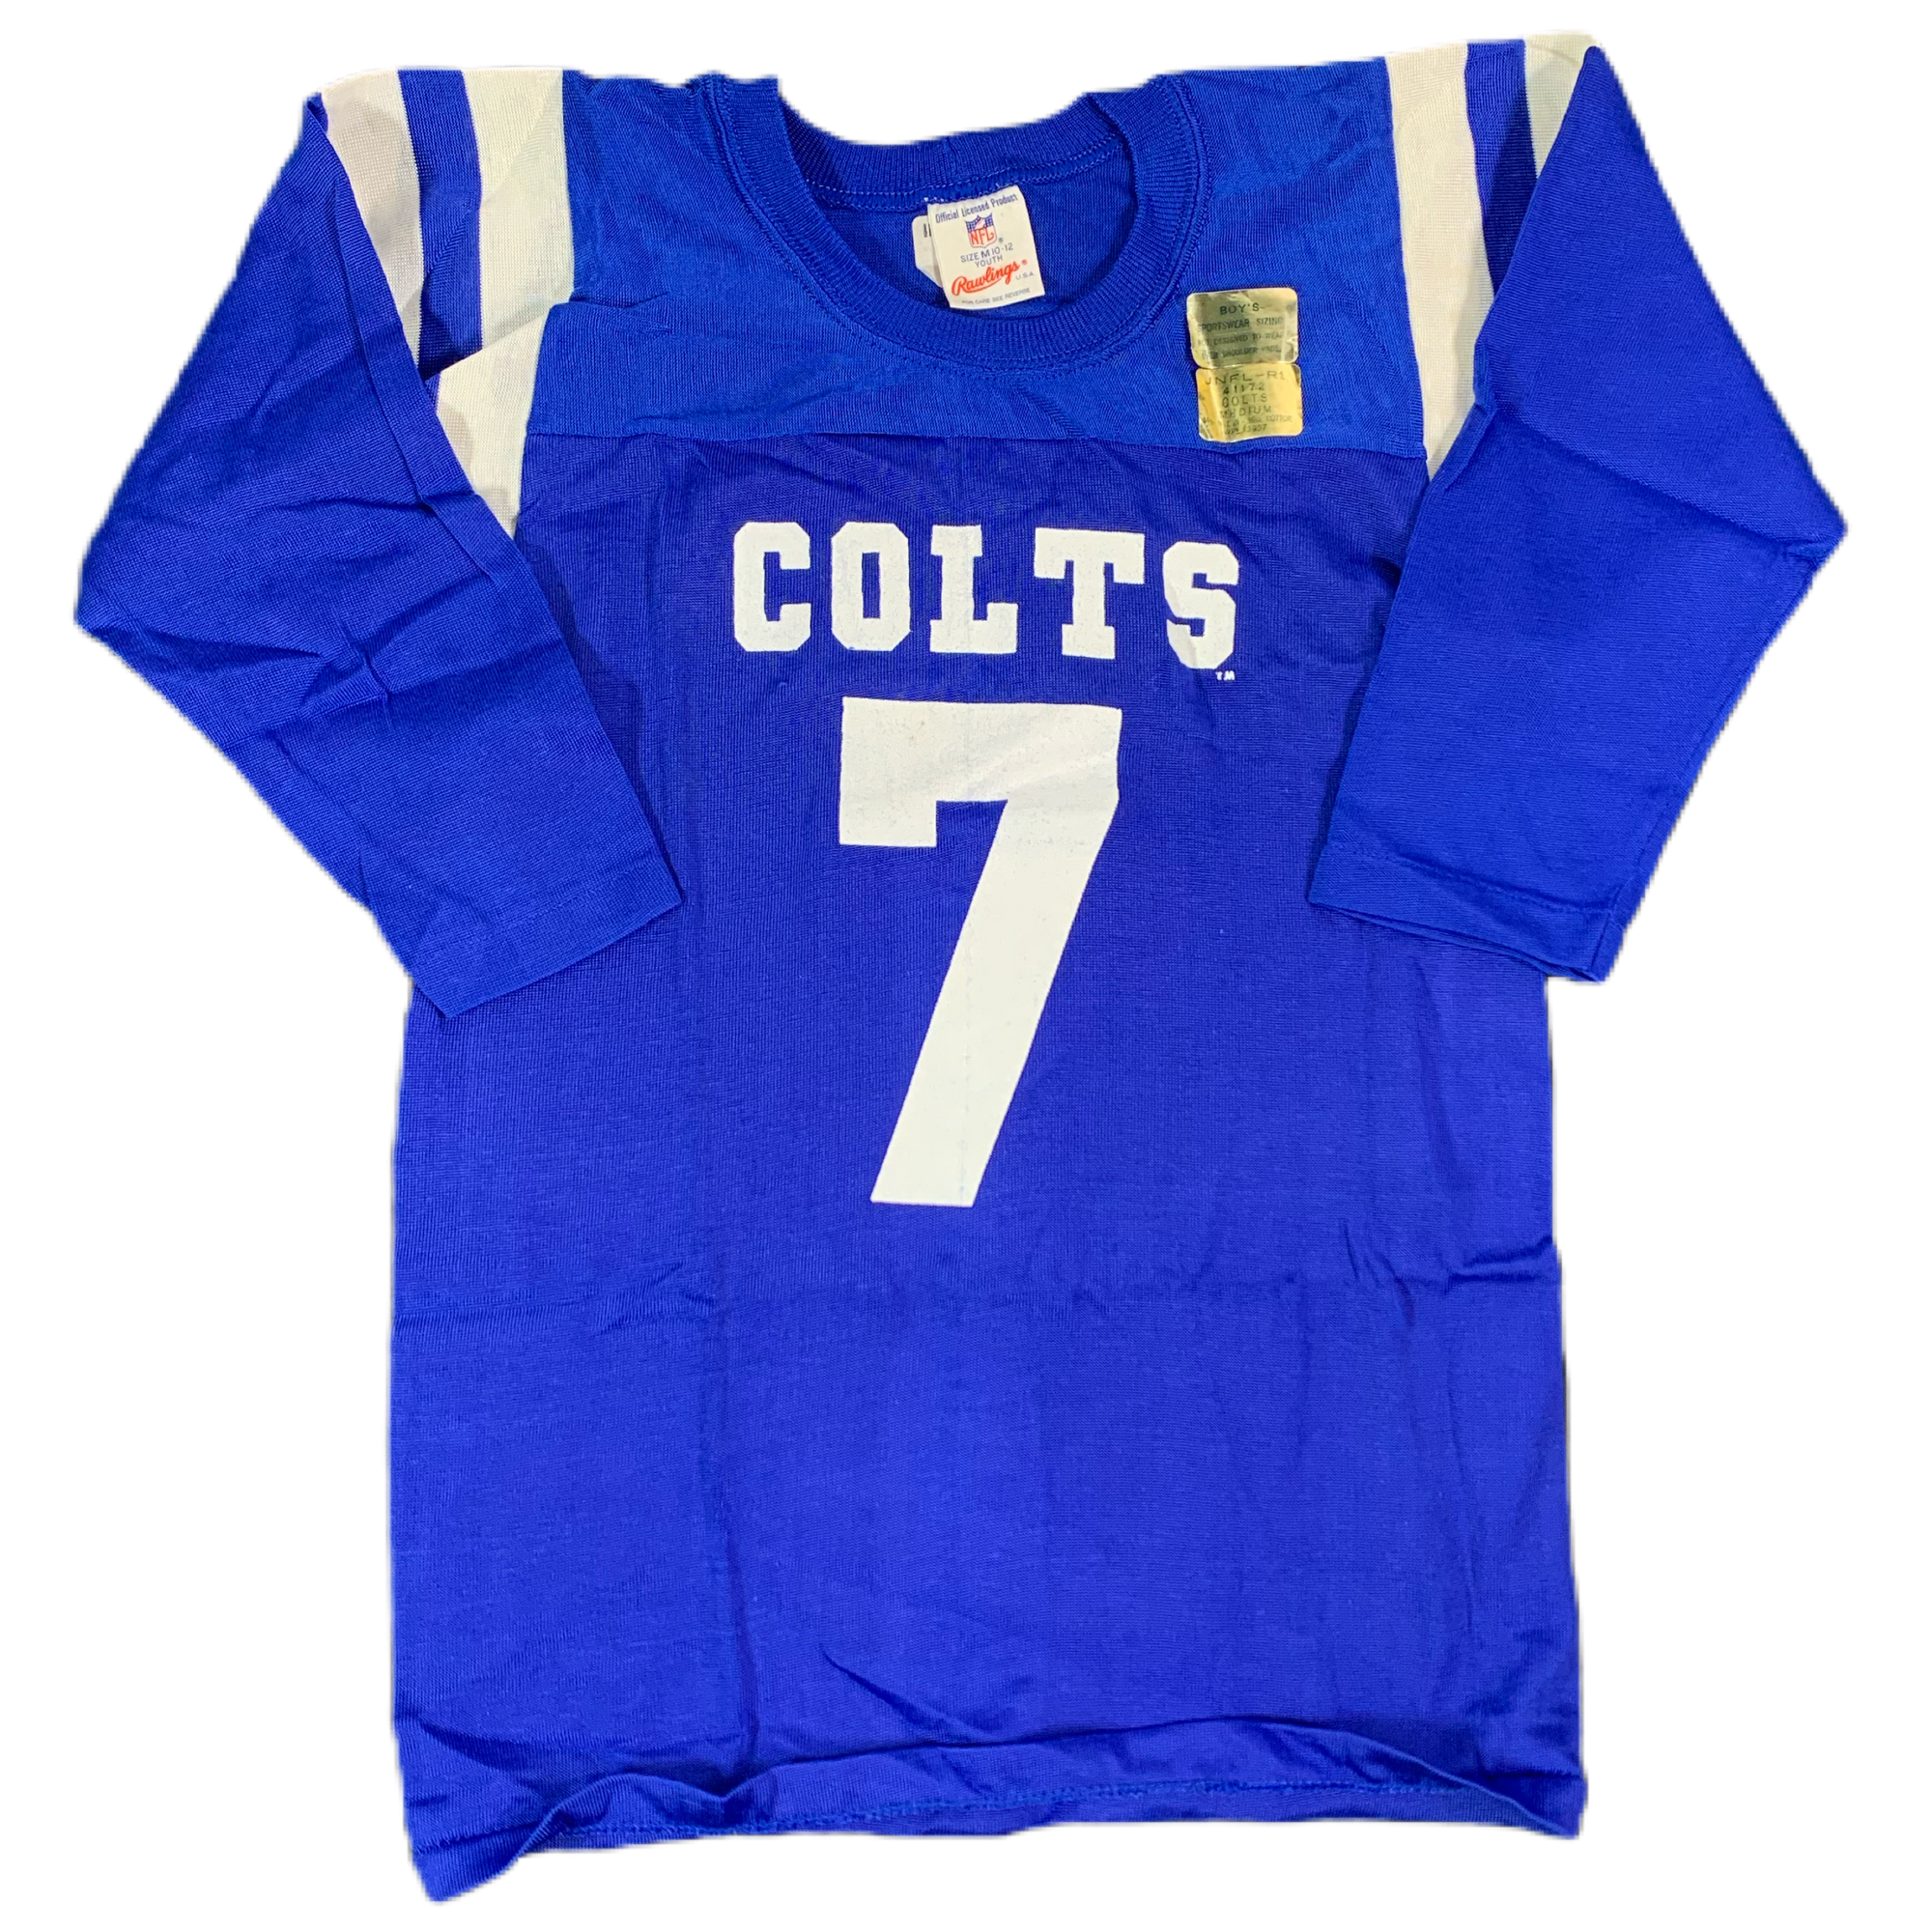 Vintage Indianapolis Colts “Rawlings” Football Jersey - jointcustodydc